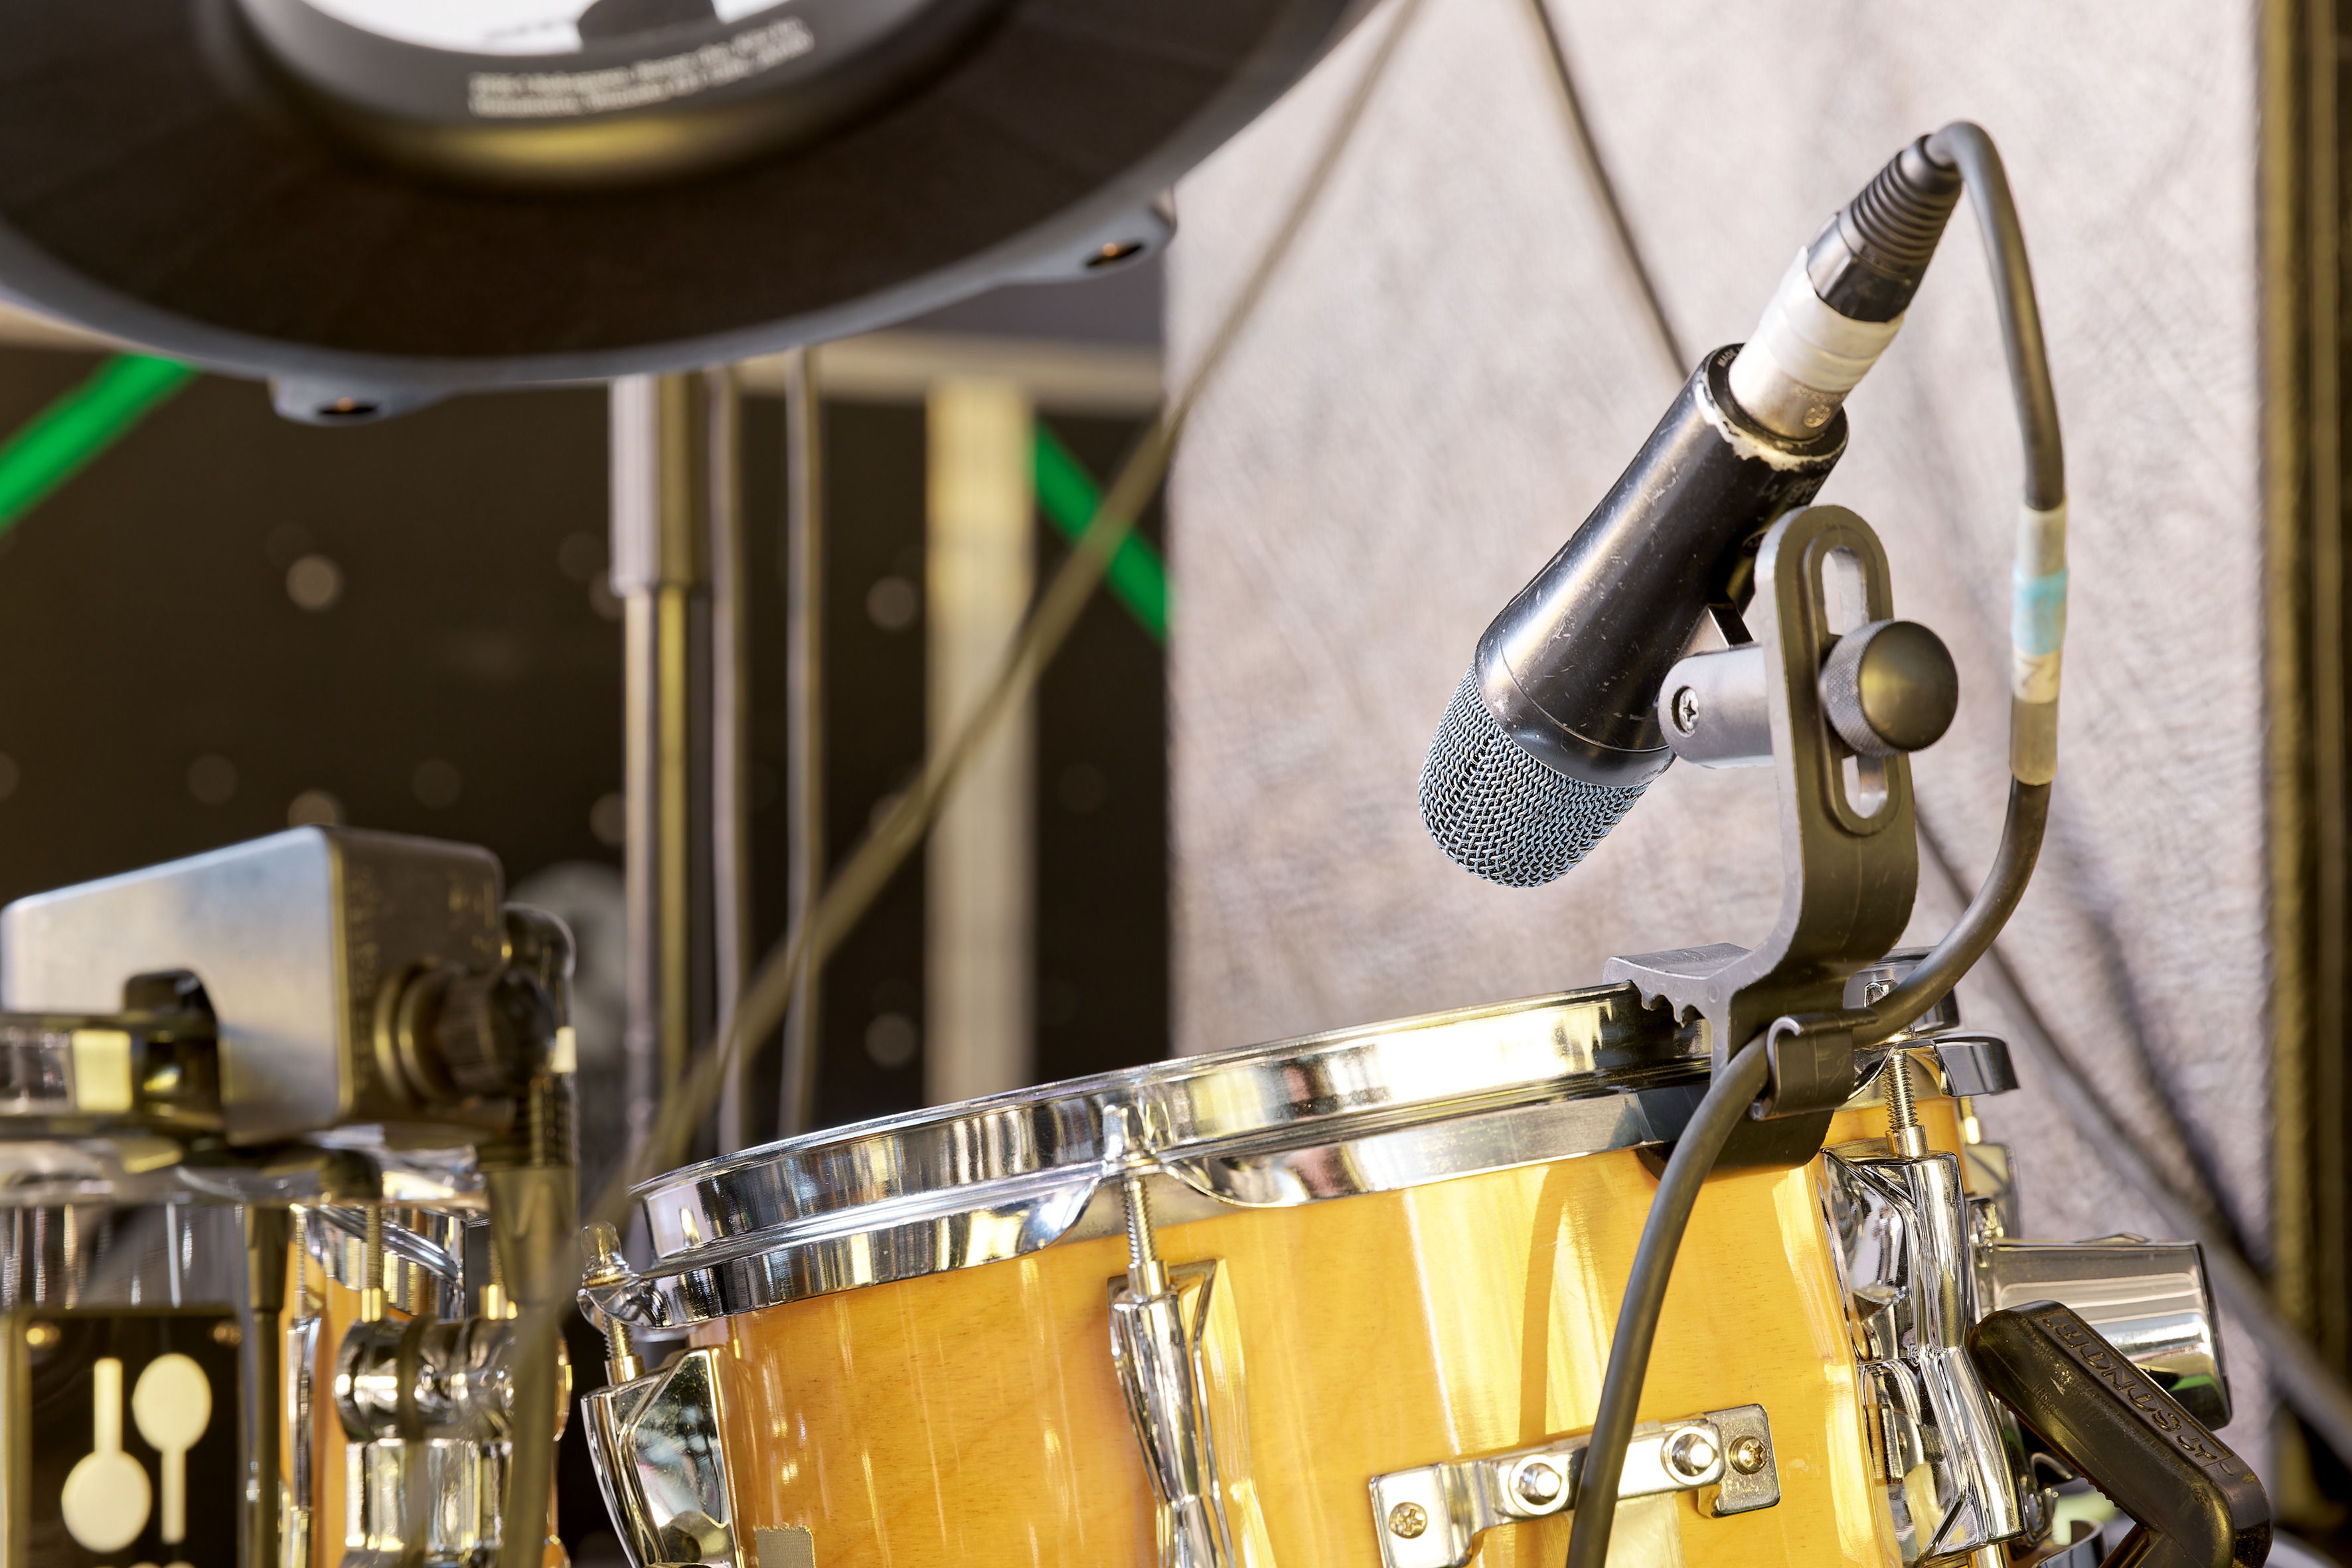 The Sennheiser e 905 is still a popular microphone for the snare